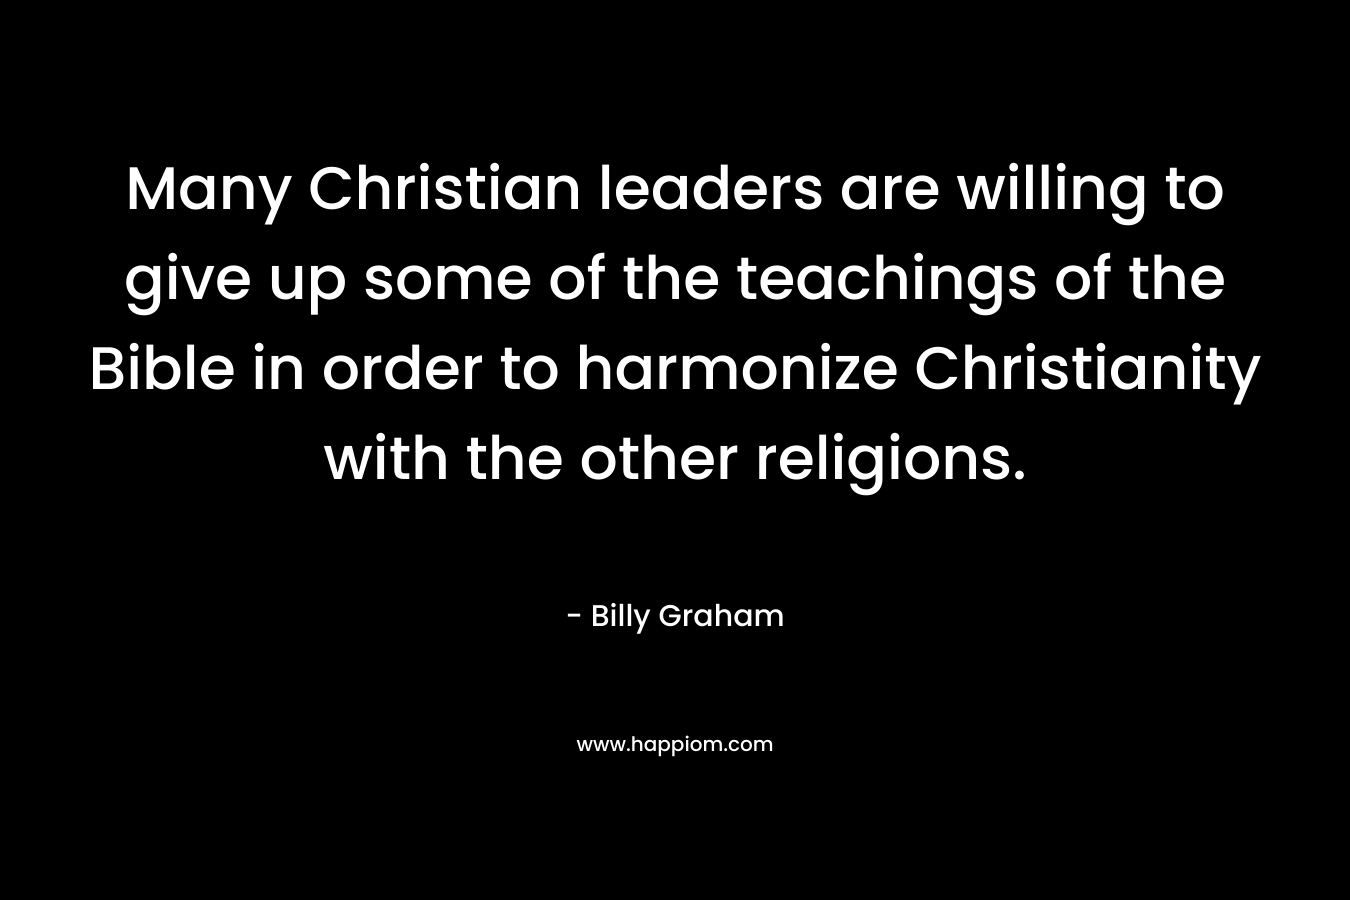 Many Christian leaders are willing to give up some of the teachings of the Bible in order to harmonize Christianity with the other religions.